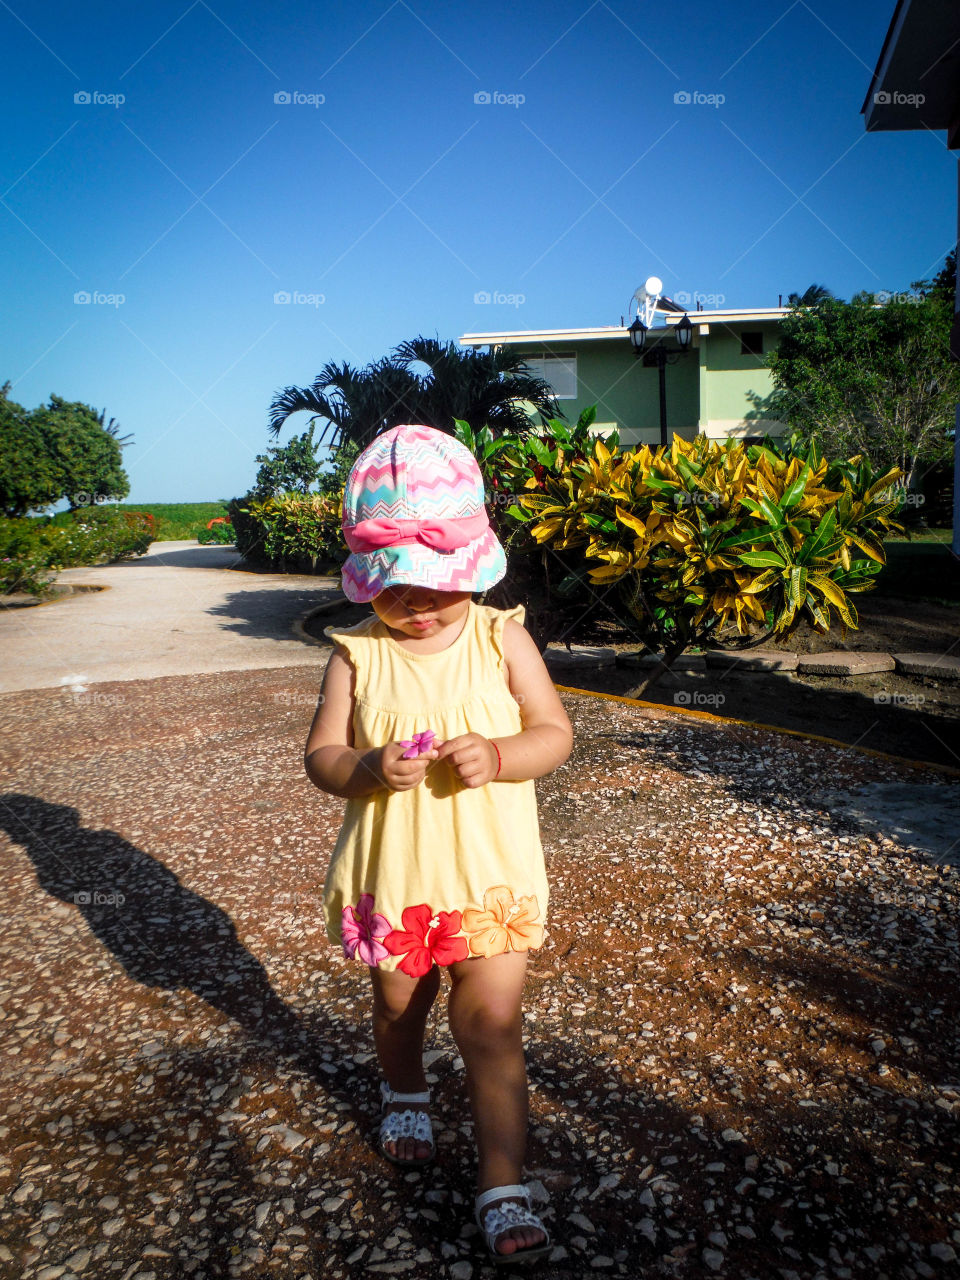 Cute toddler on a morning walk